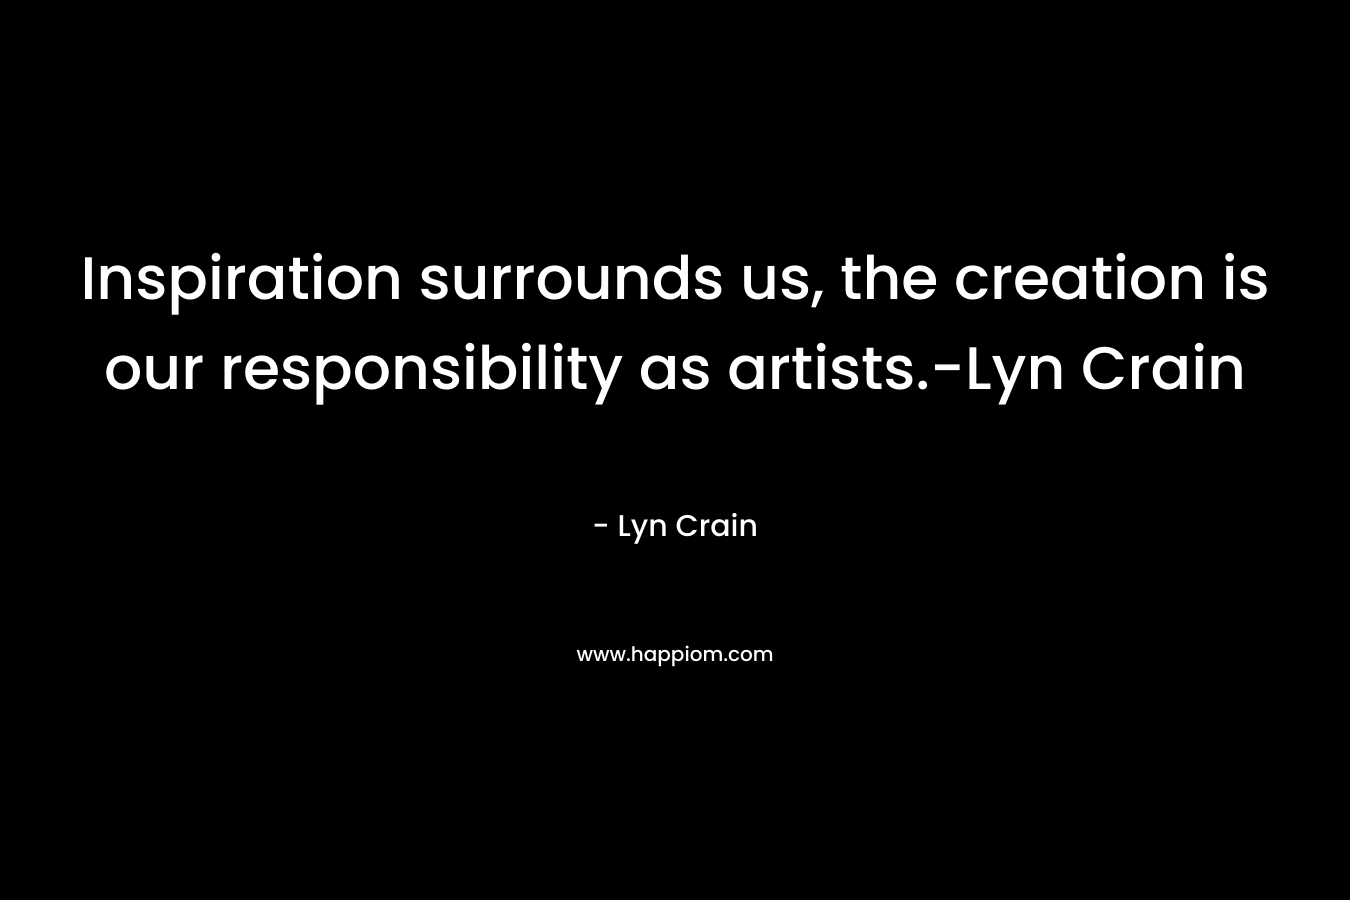 Inspiration surrounds us, the creation is our responsibility as artists.-Lyn Crain